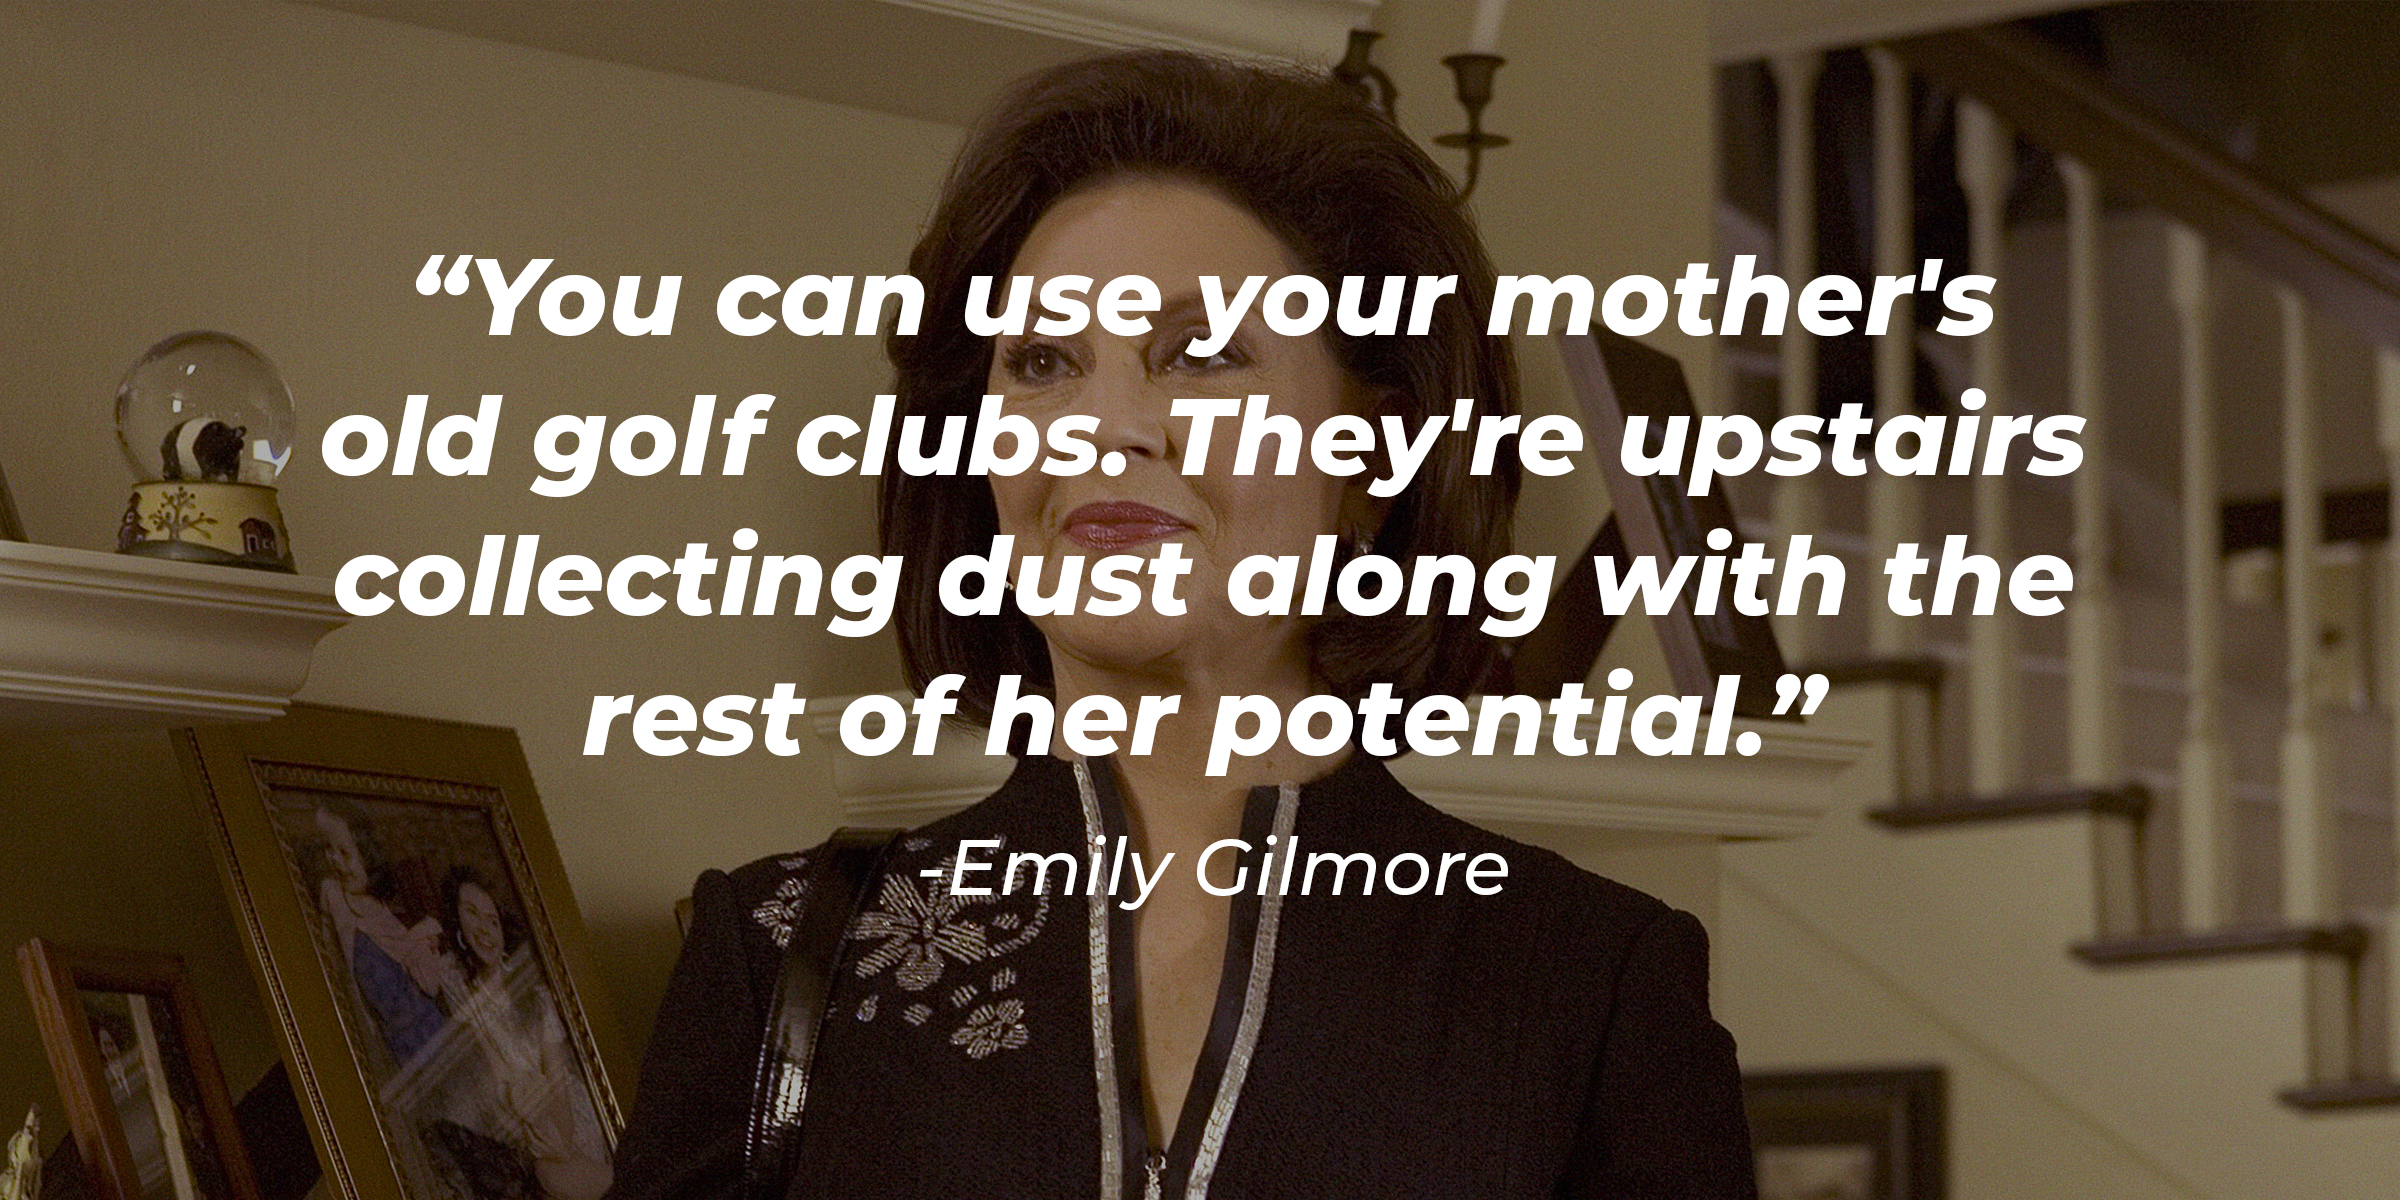 A photo of Emily Gilmore with the quote: "You can use your mother's old golf clubs. They're upstairs collecting dust along with the rest of her potential." | Source: Getty Images